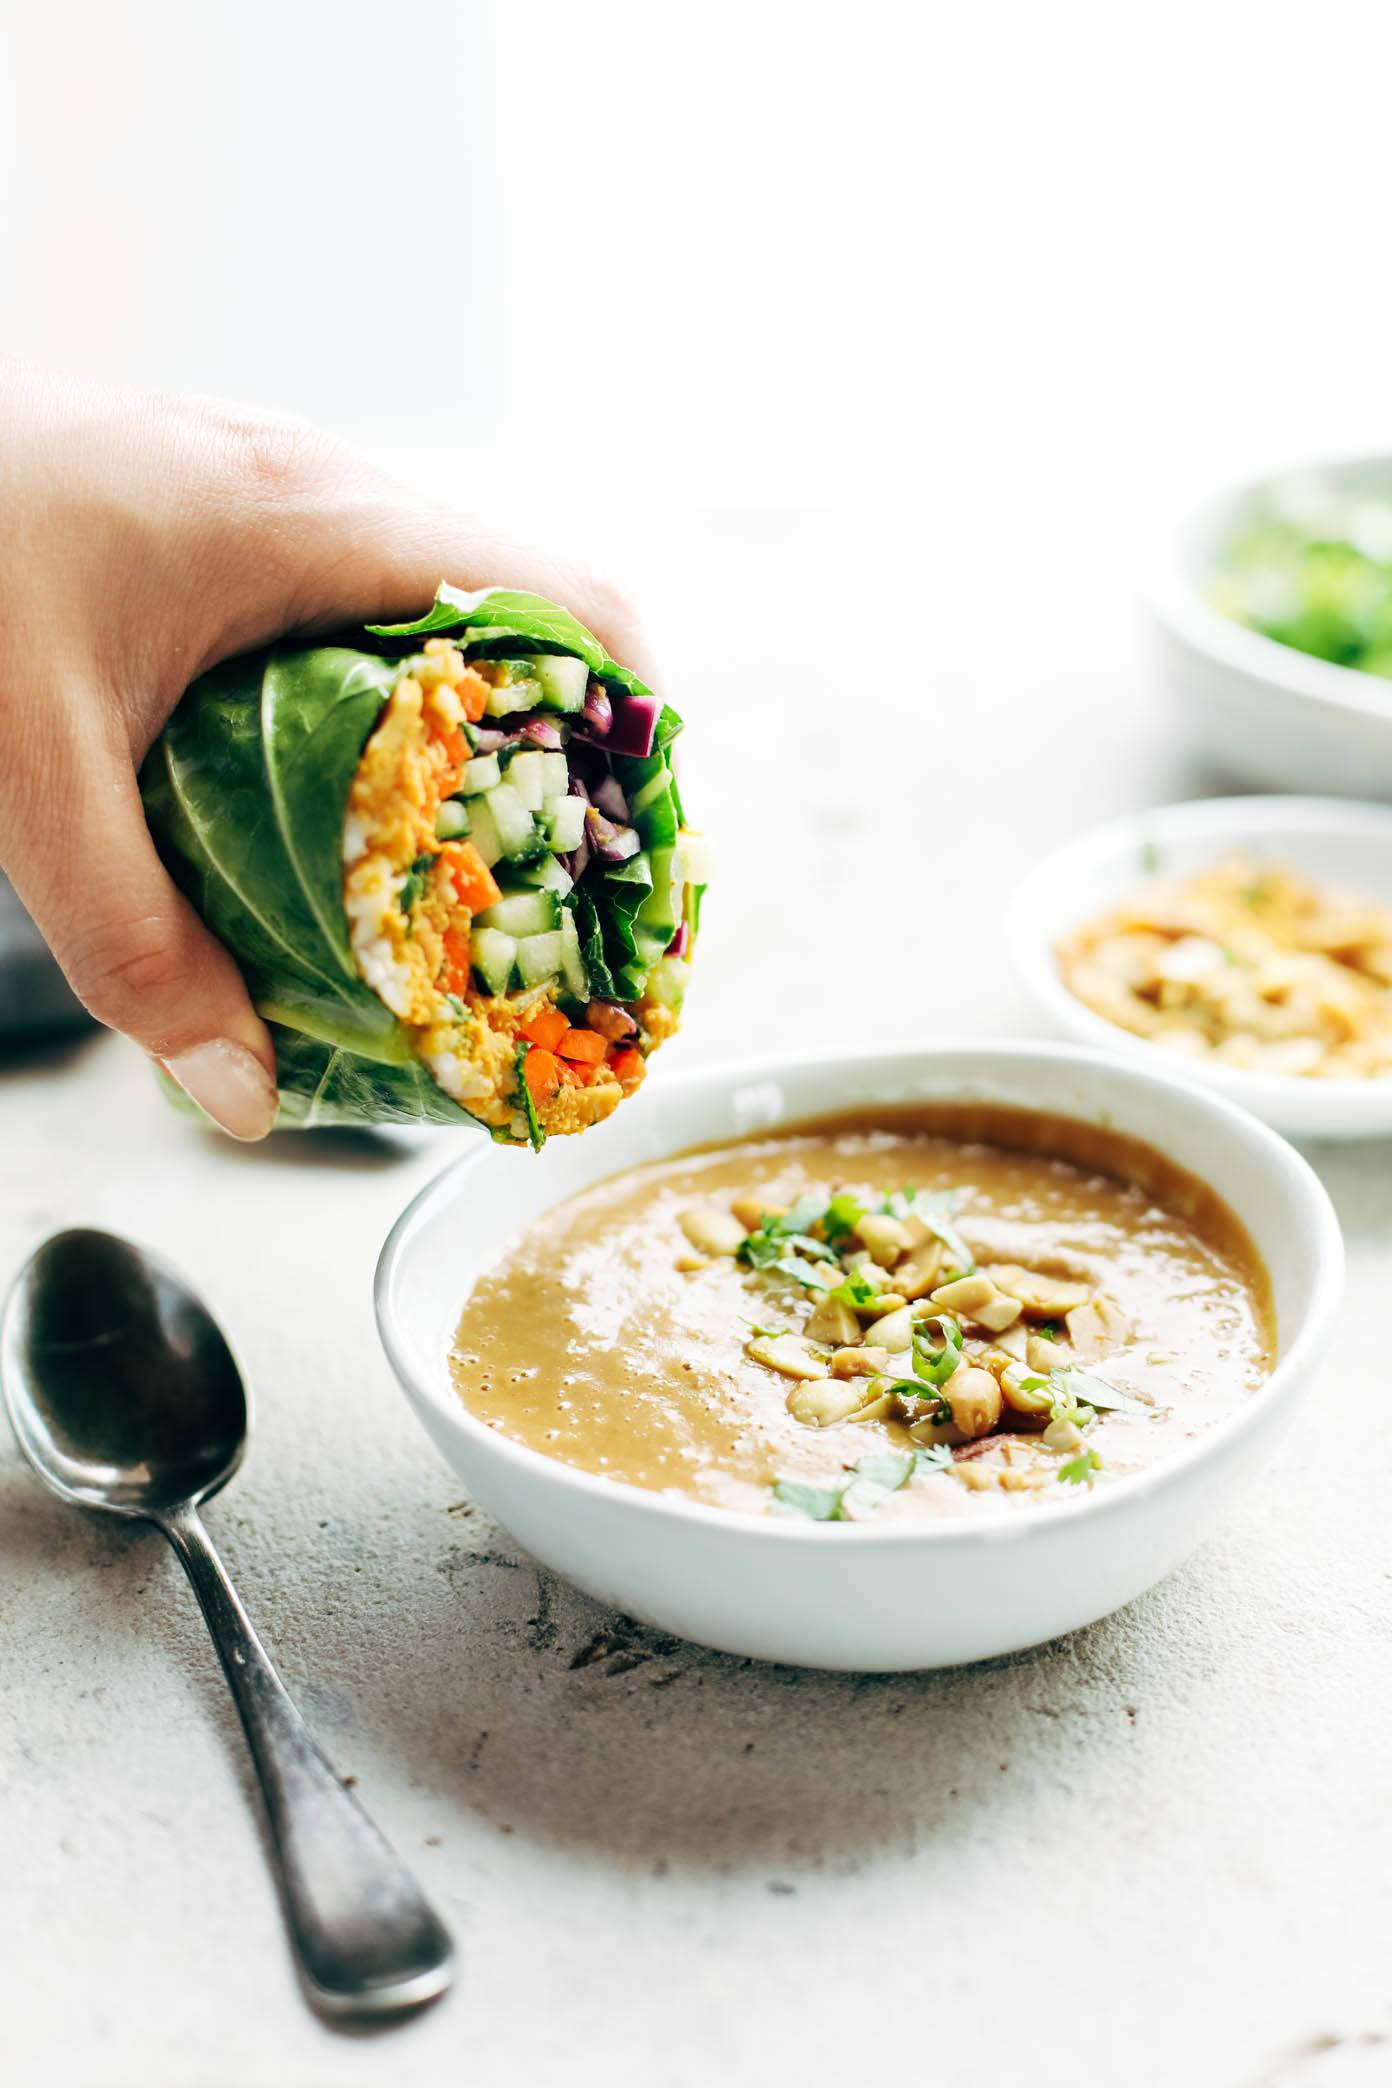 Detox Rainbow Roll-Ups - with curry hummus and veggies in a collard leaf, dunked in peanut sauce! most beautiful healthy desk lunch! | pinchofyum.com